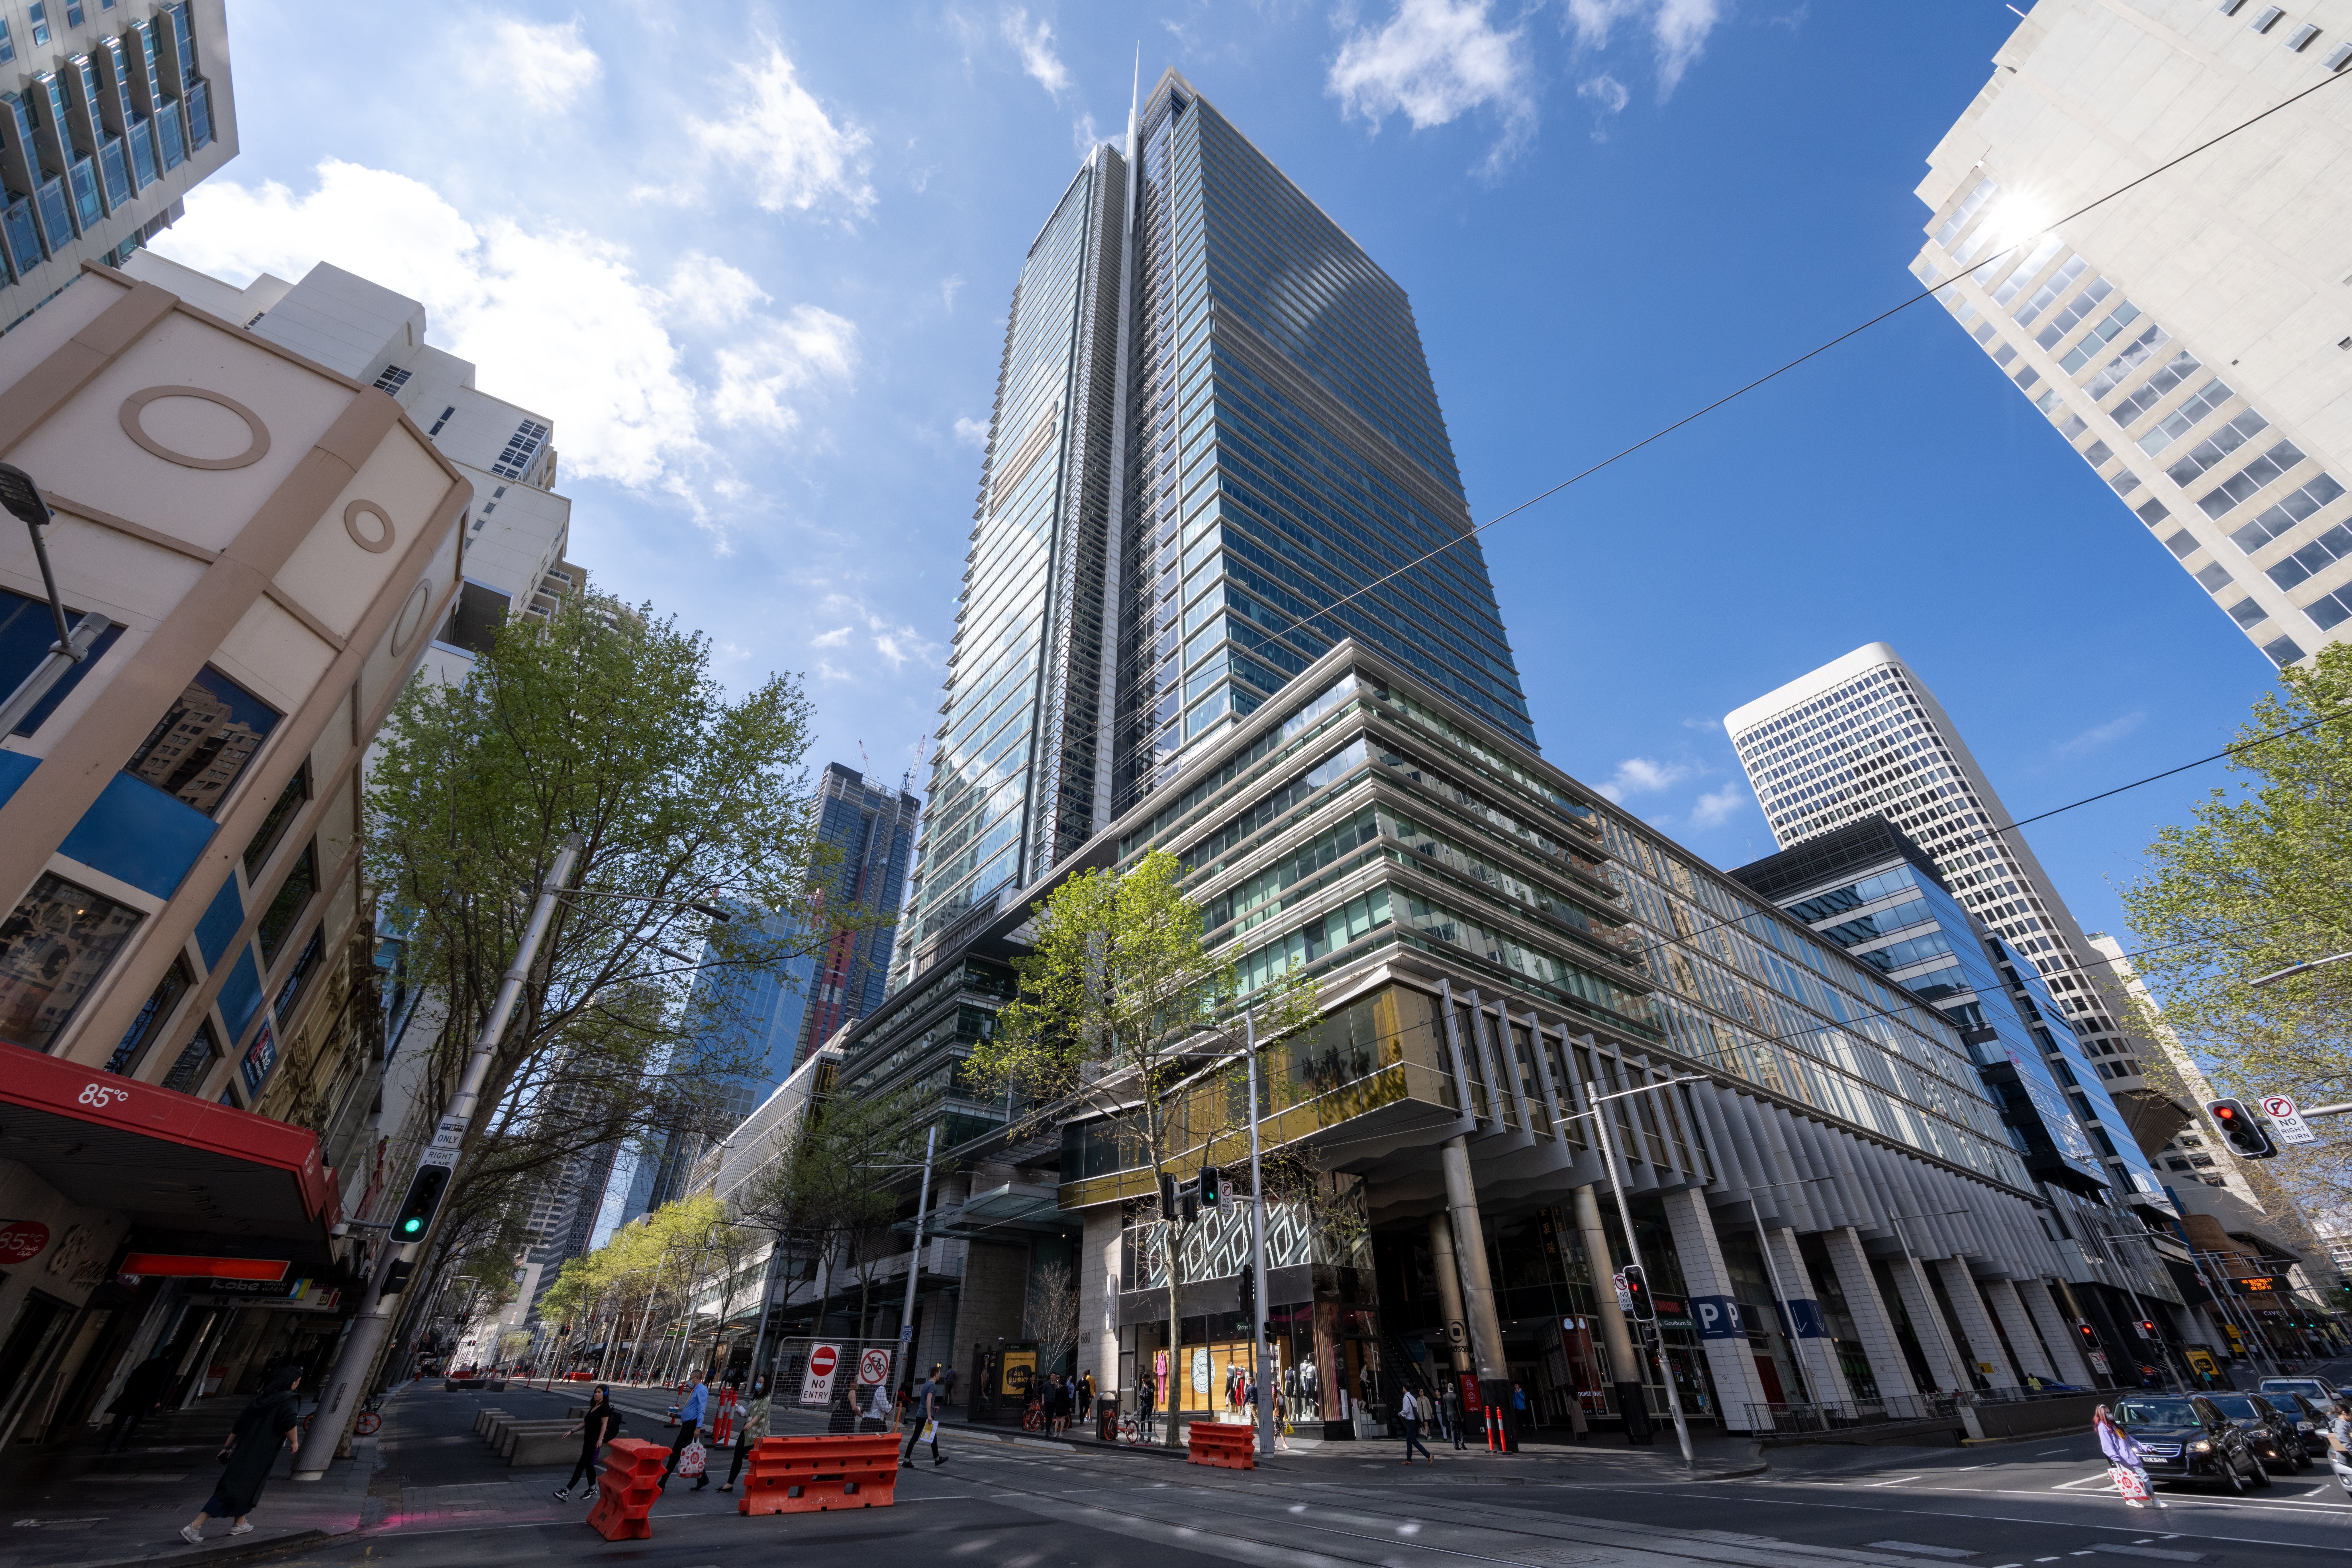 680 George Street in Sydney, New South Wales